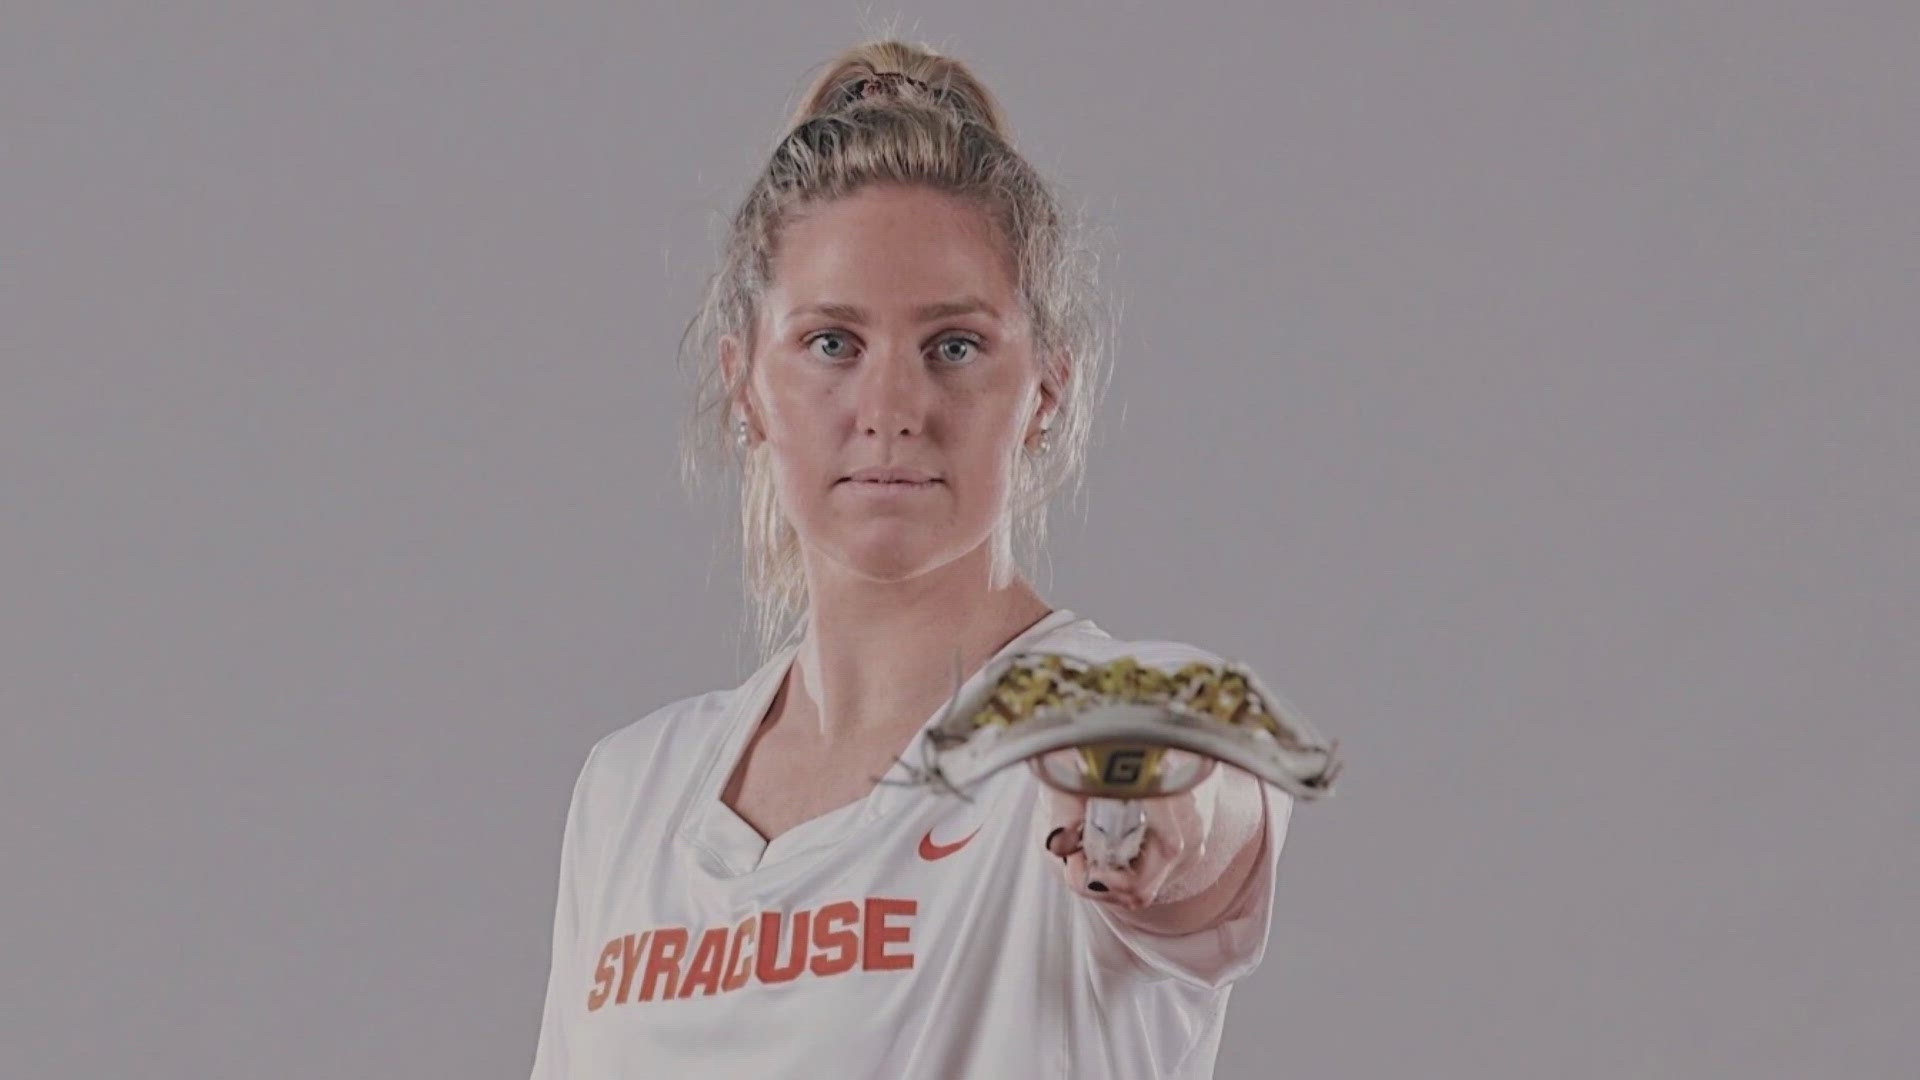 Ann Marie Hawley was the first girls lacrosse player from Florida to play at Syracuse University.